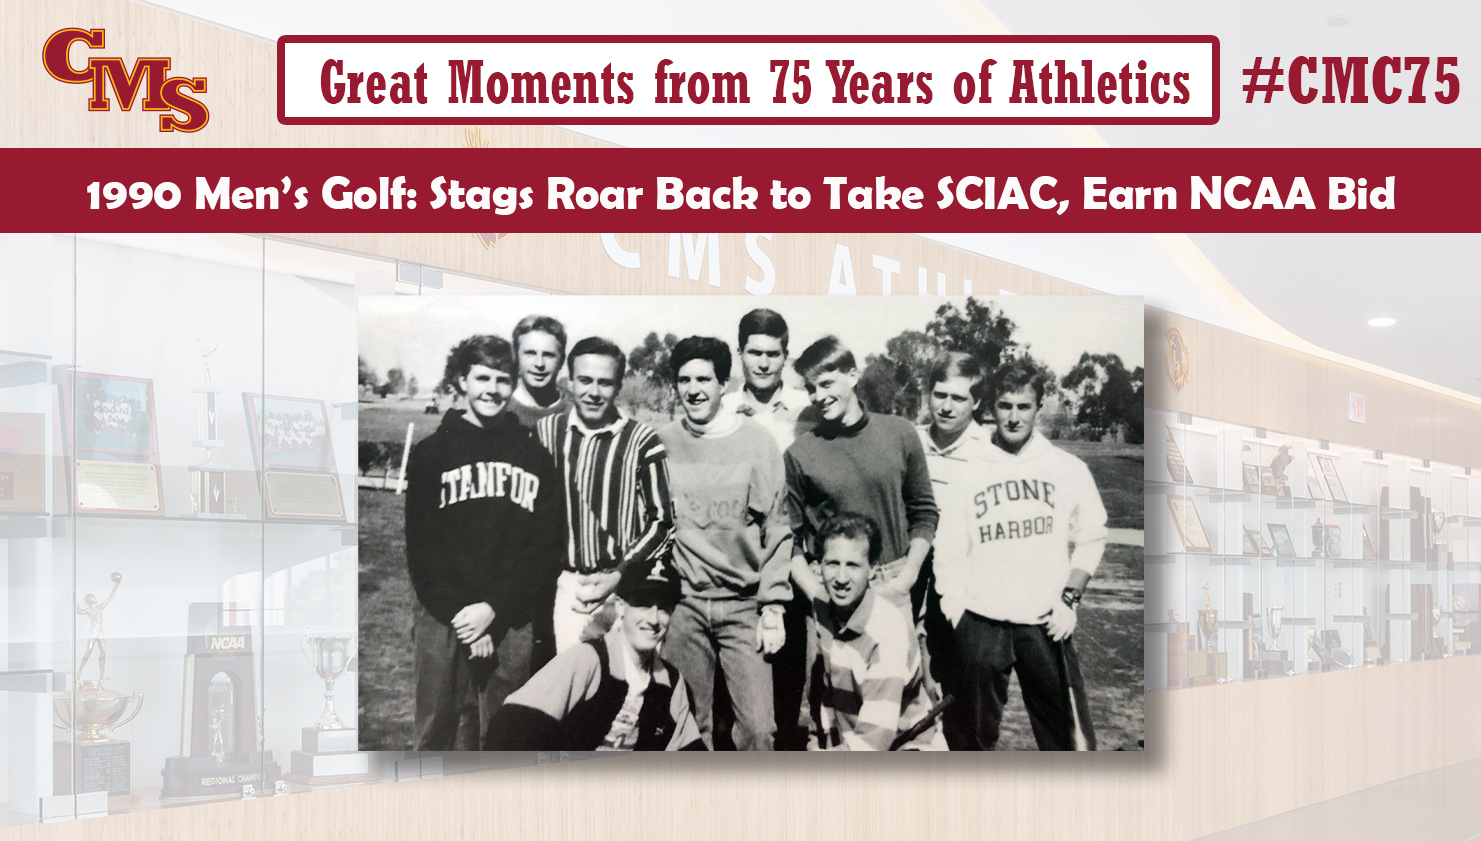 Team shot of the 1990 CMS Men's Golf Team. Words over the photo read: Great Moments from 75 Years of Athletics, 1990 Men's Golf: Stags Roar Back to Take SCIAC, Earn NCAA Bid